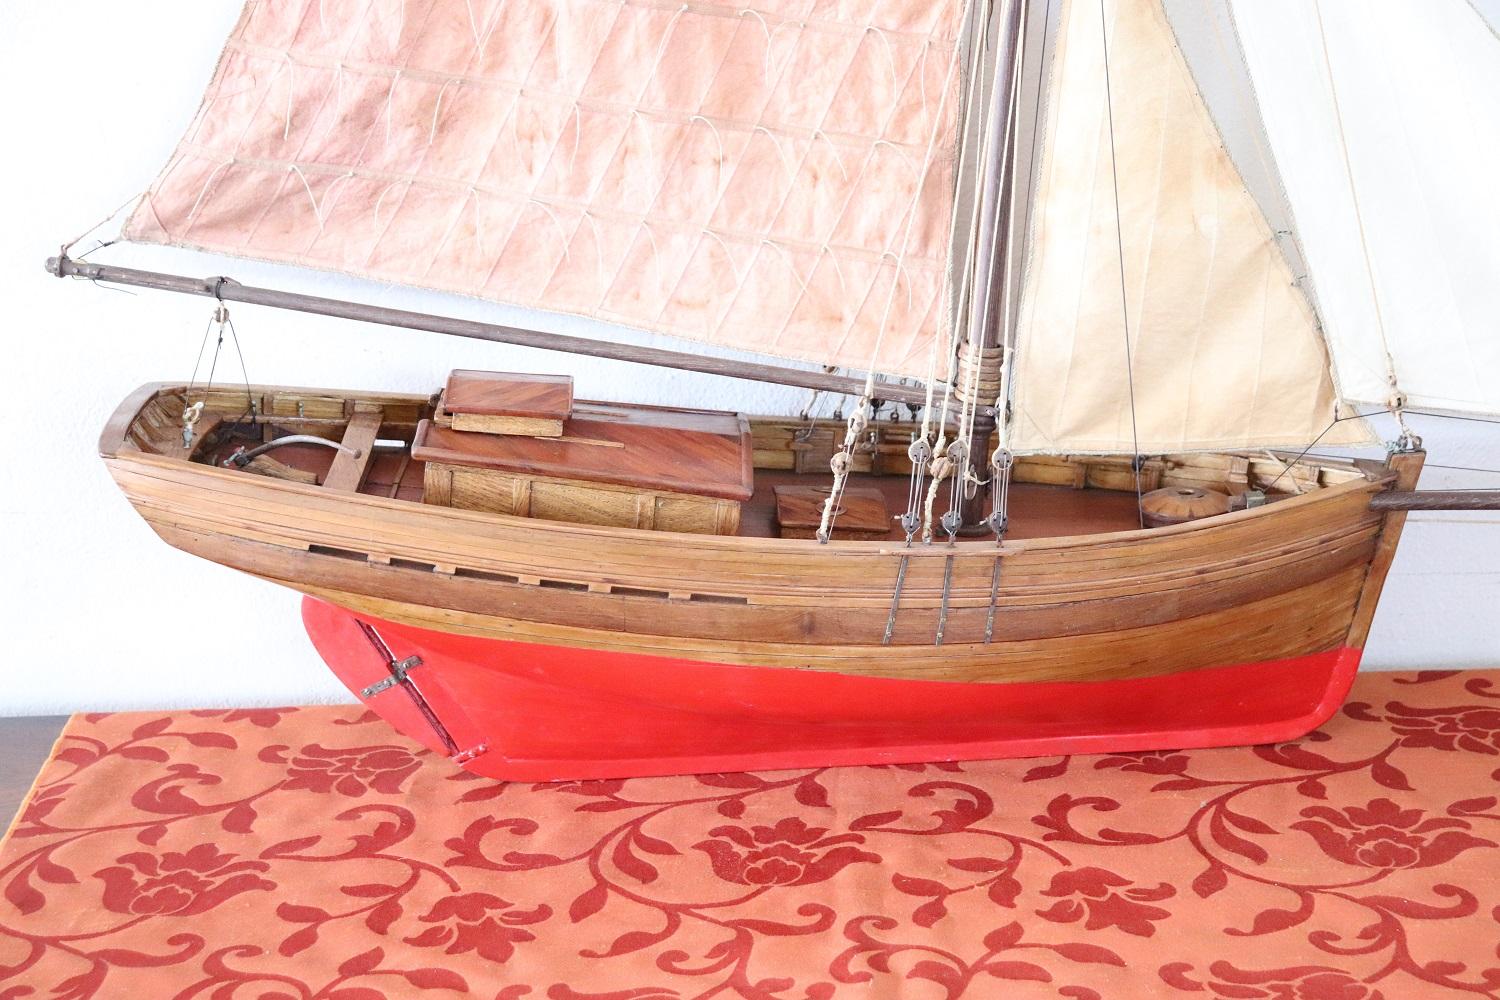 Model sail boat made by hand of wood and canvas, 1940s.